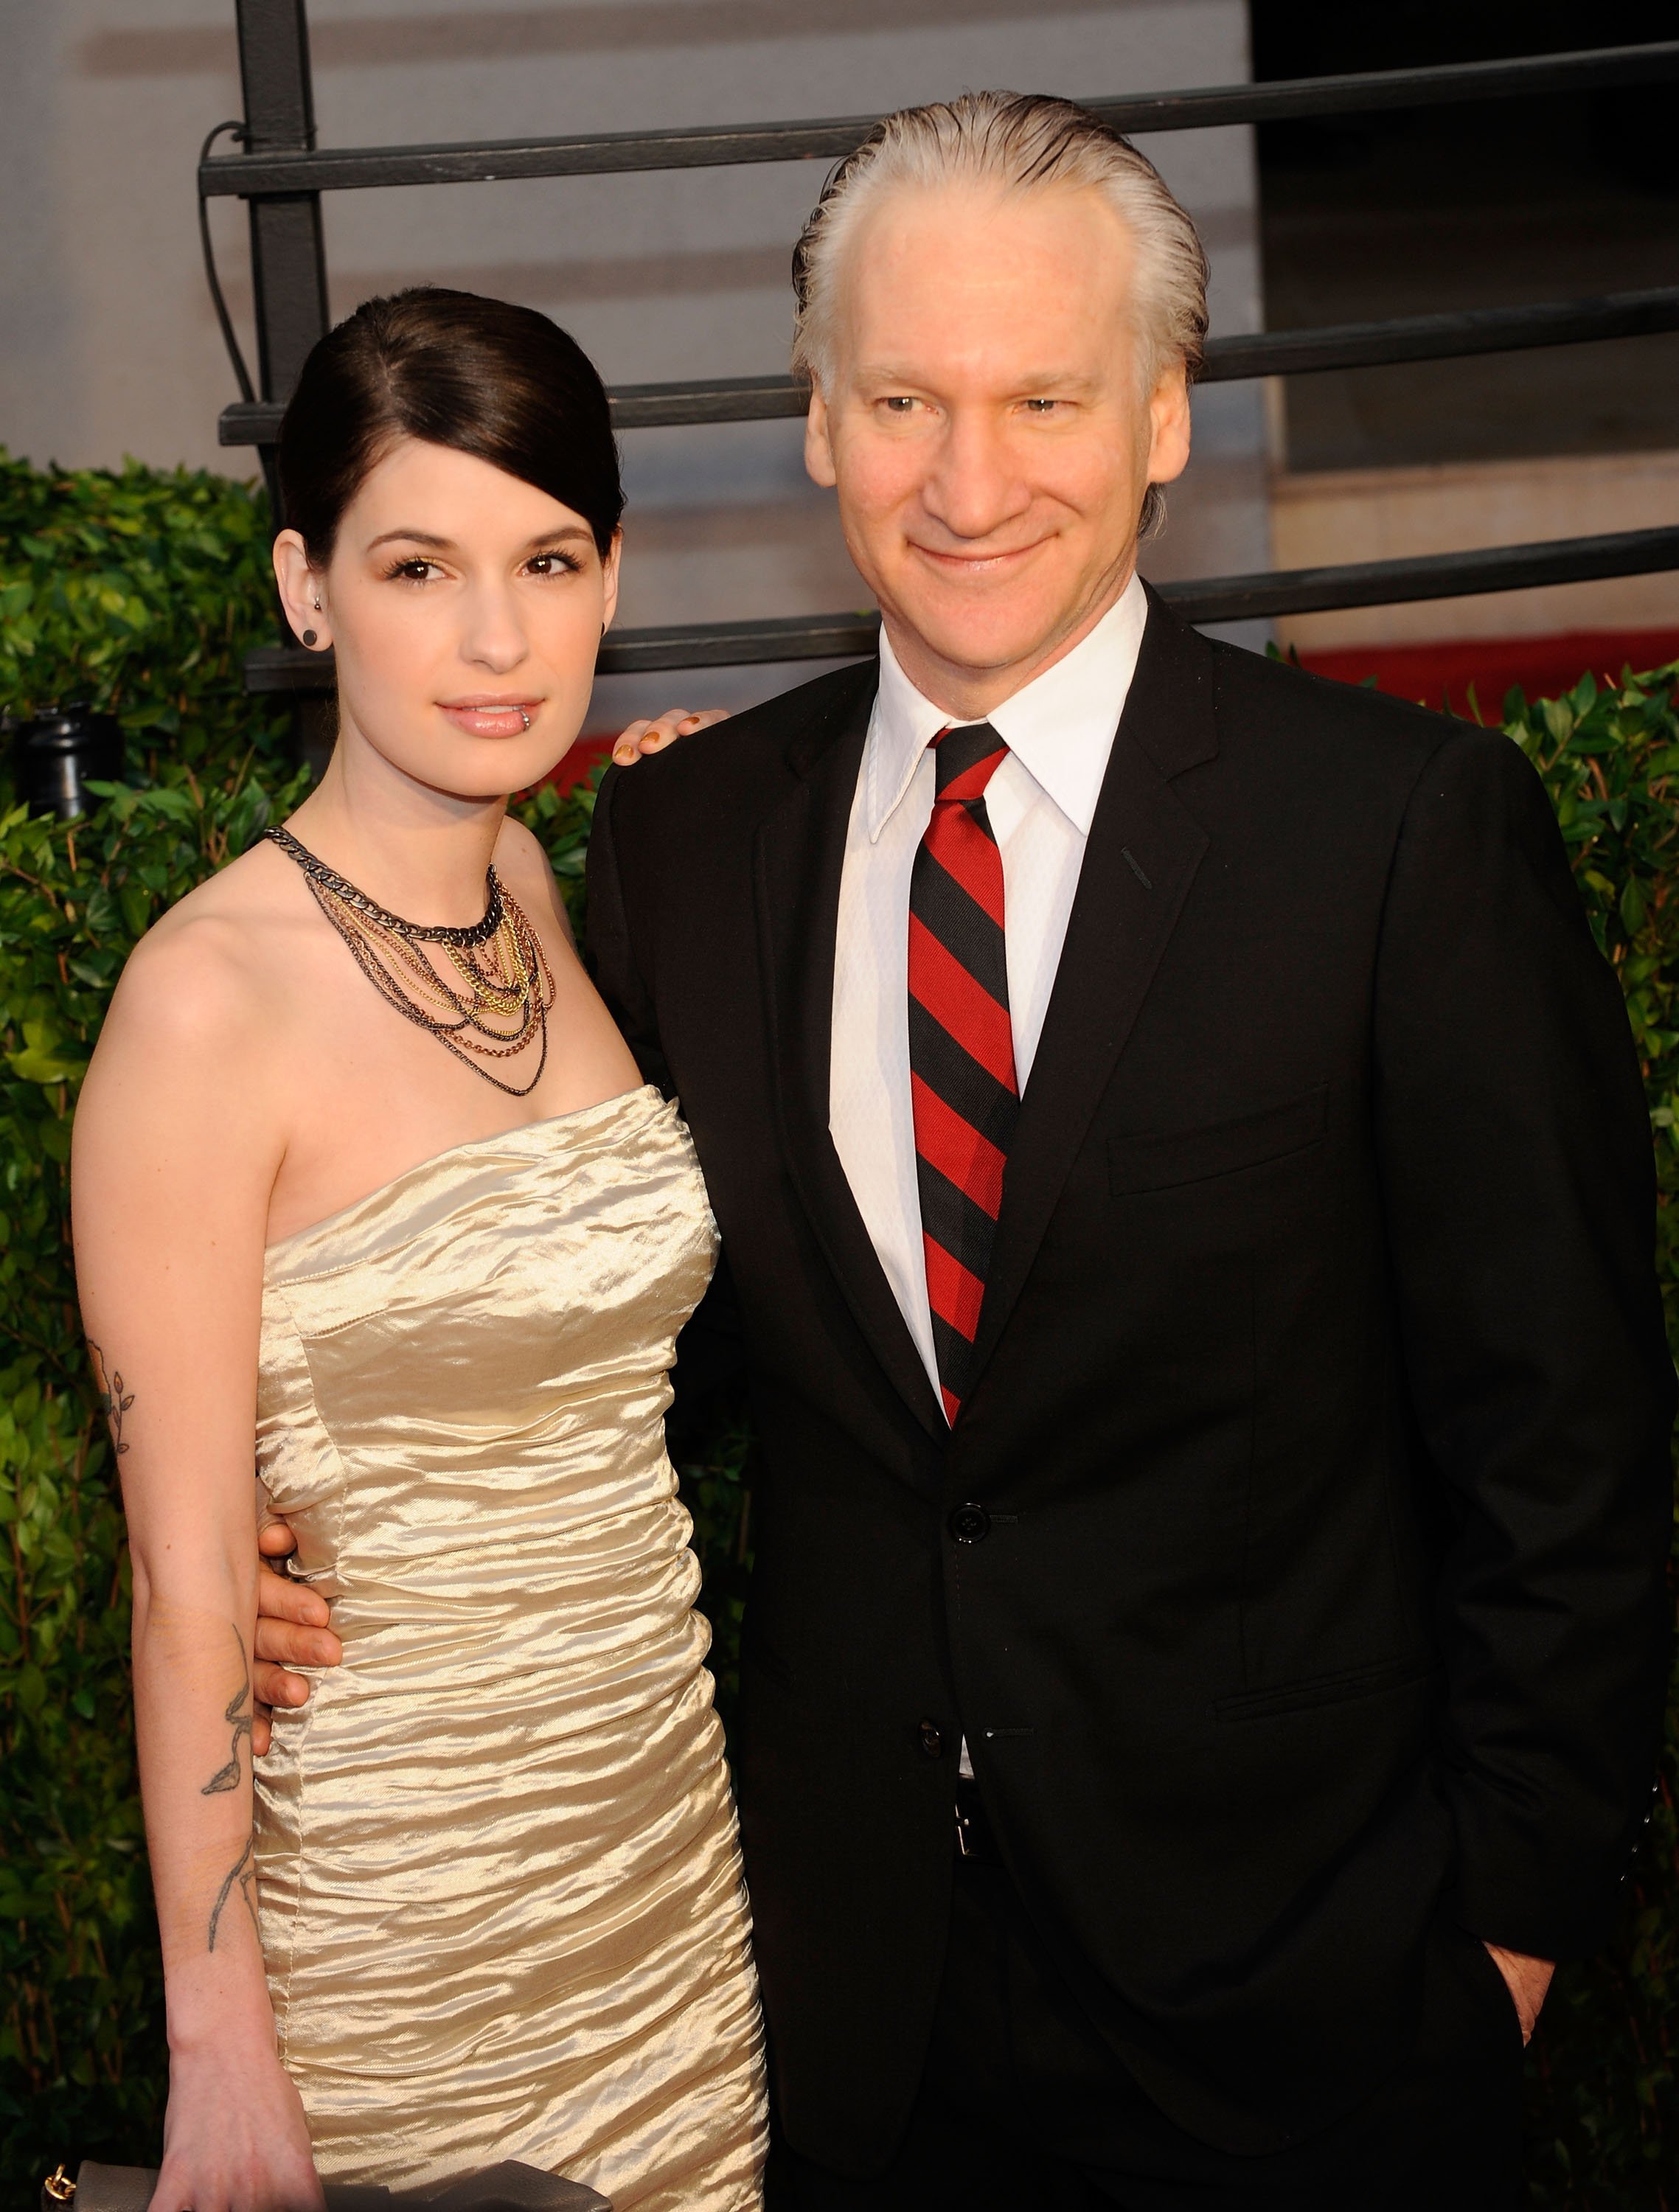 Bill Maher and Cara Santa Maria at the 2010 Vanity Fair Oscar Party on March 7, 2010 | Source: Getty Images